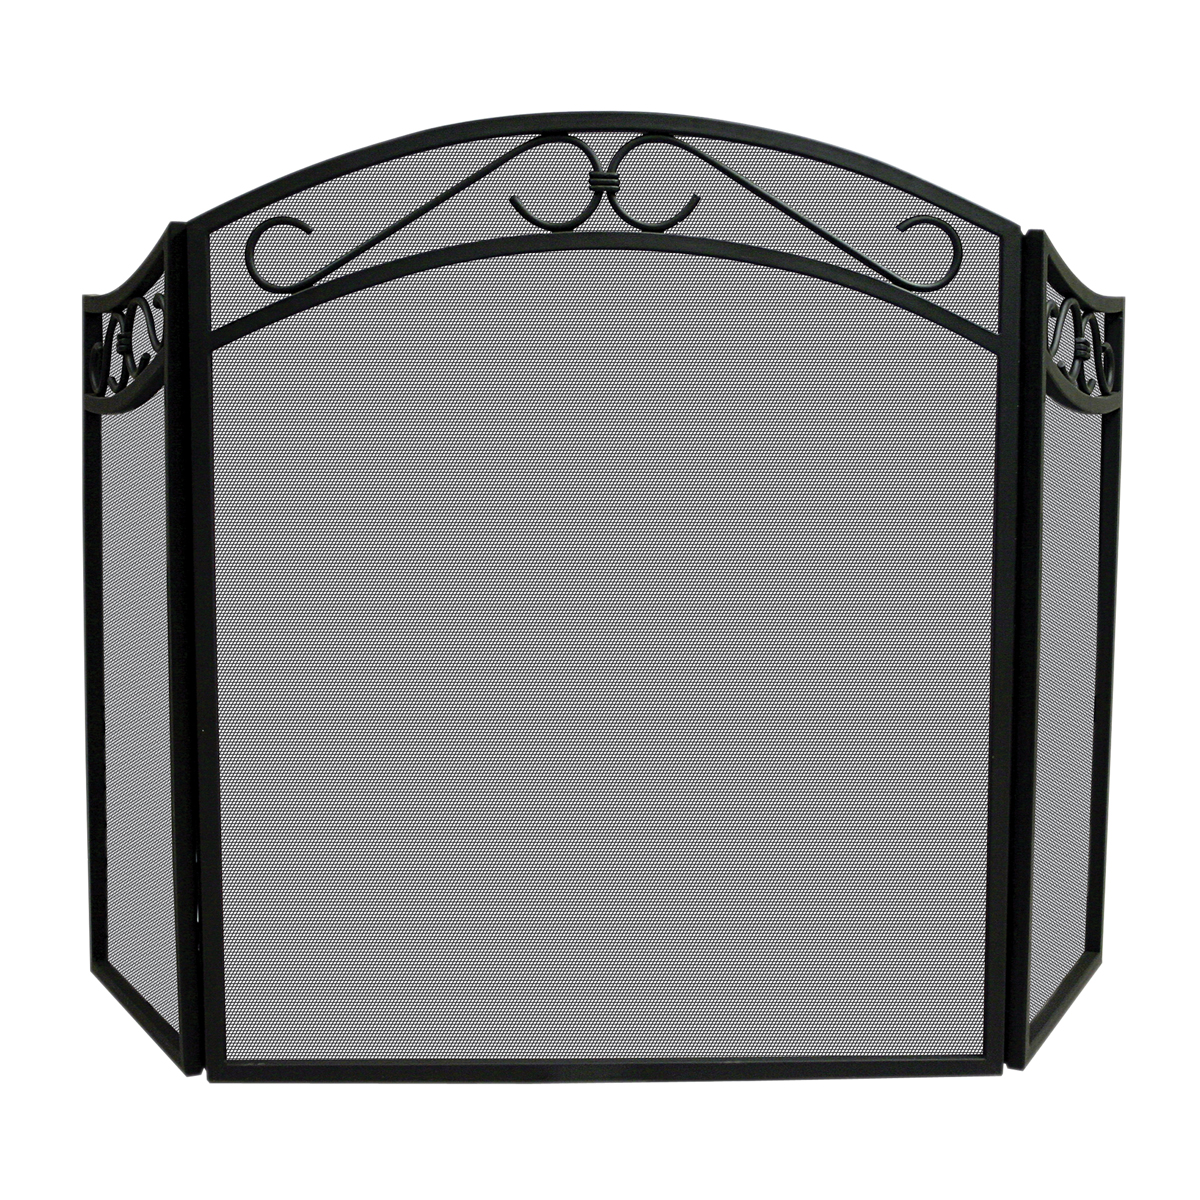 UniFlame 3 Fold Black Wrought Iron Arch Top Screen with Scrolls